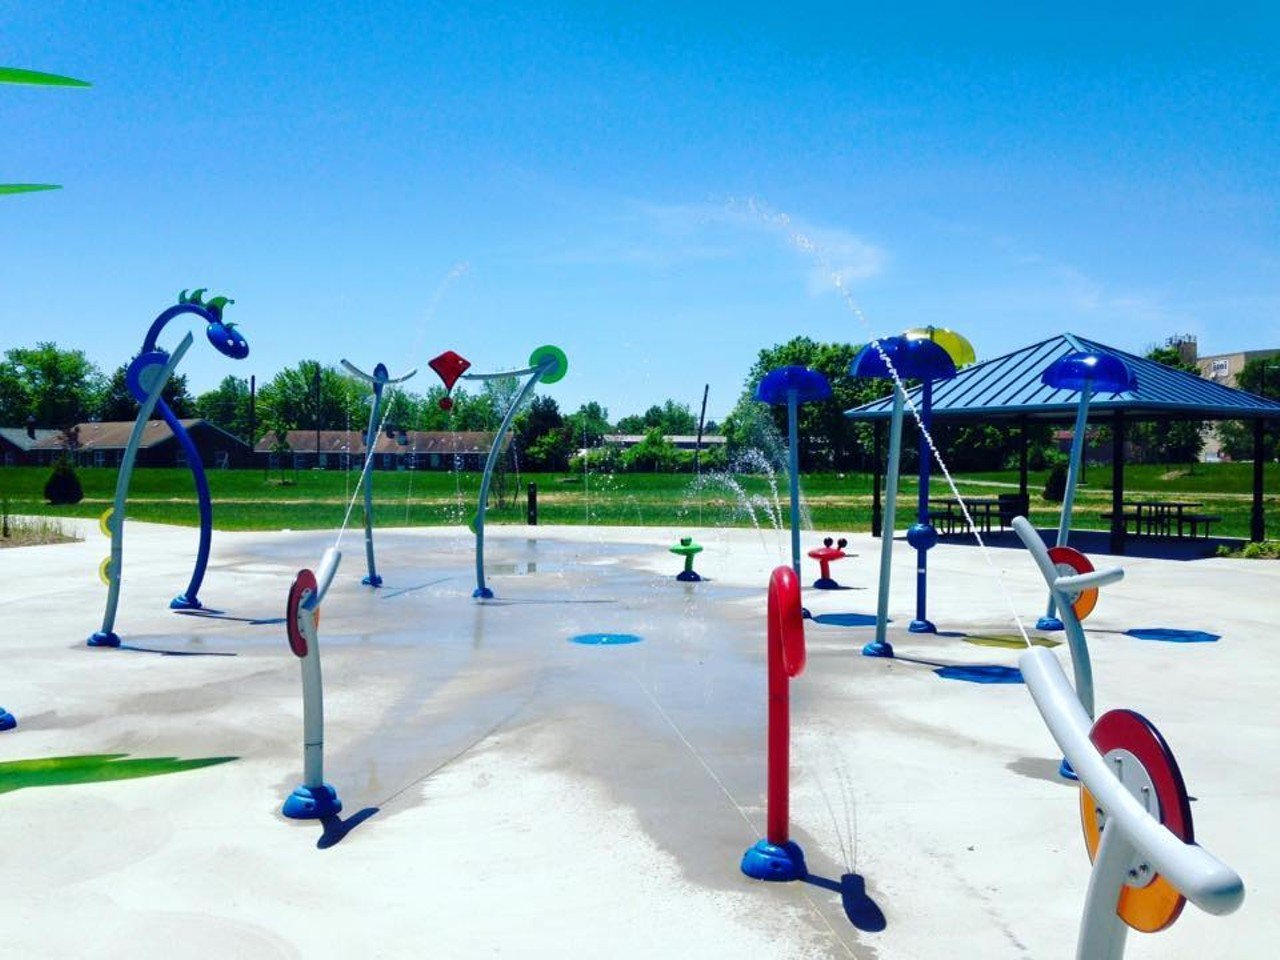 Silver Street Park
2043 Silver Street 
Located in New Albany, Silver Street Park has tons of amenities, including a great public splash pad.